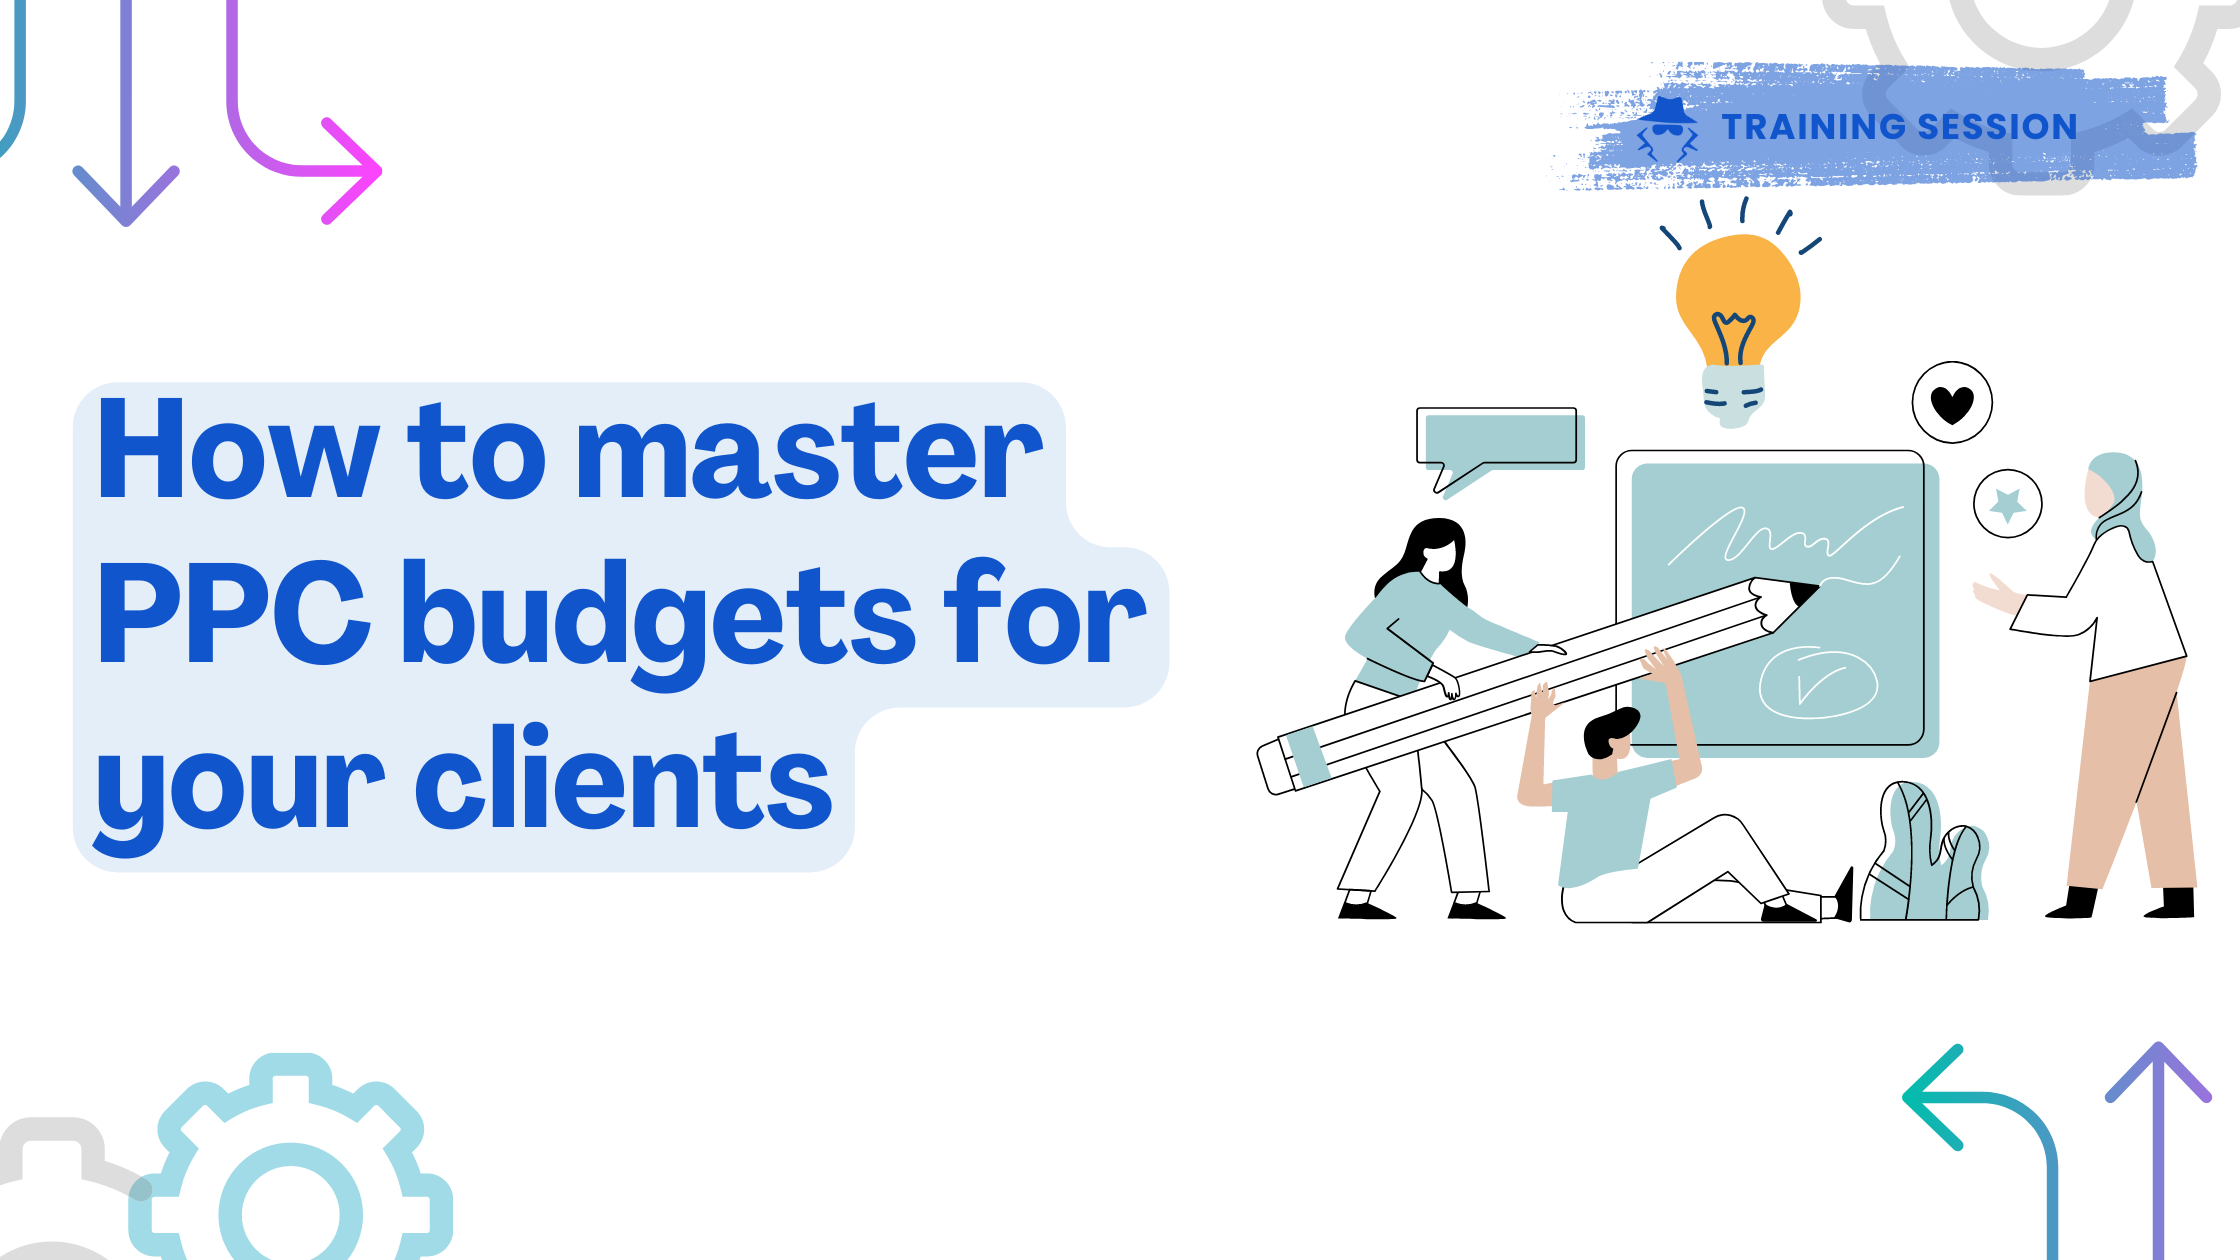 How to master PPC budgets for your clients